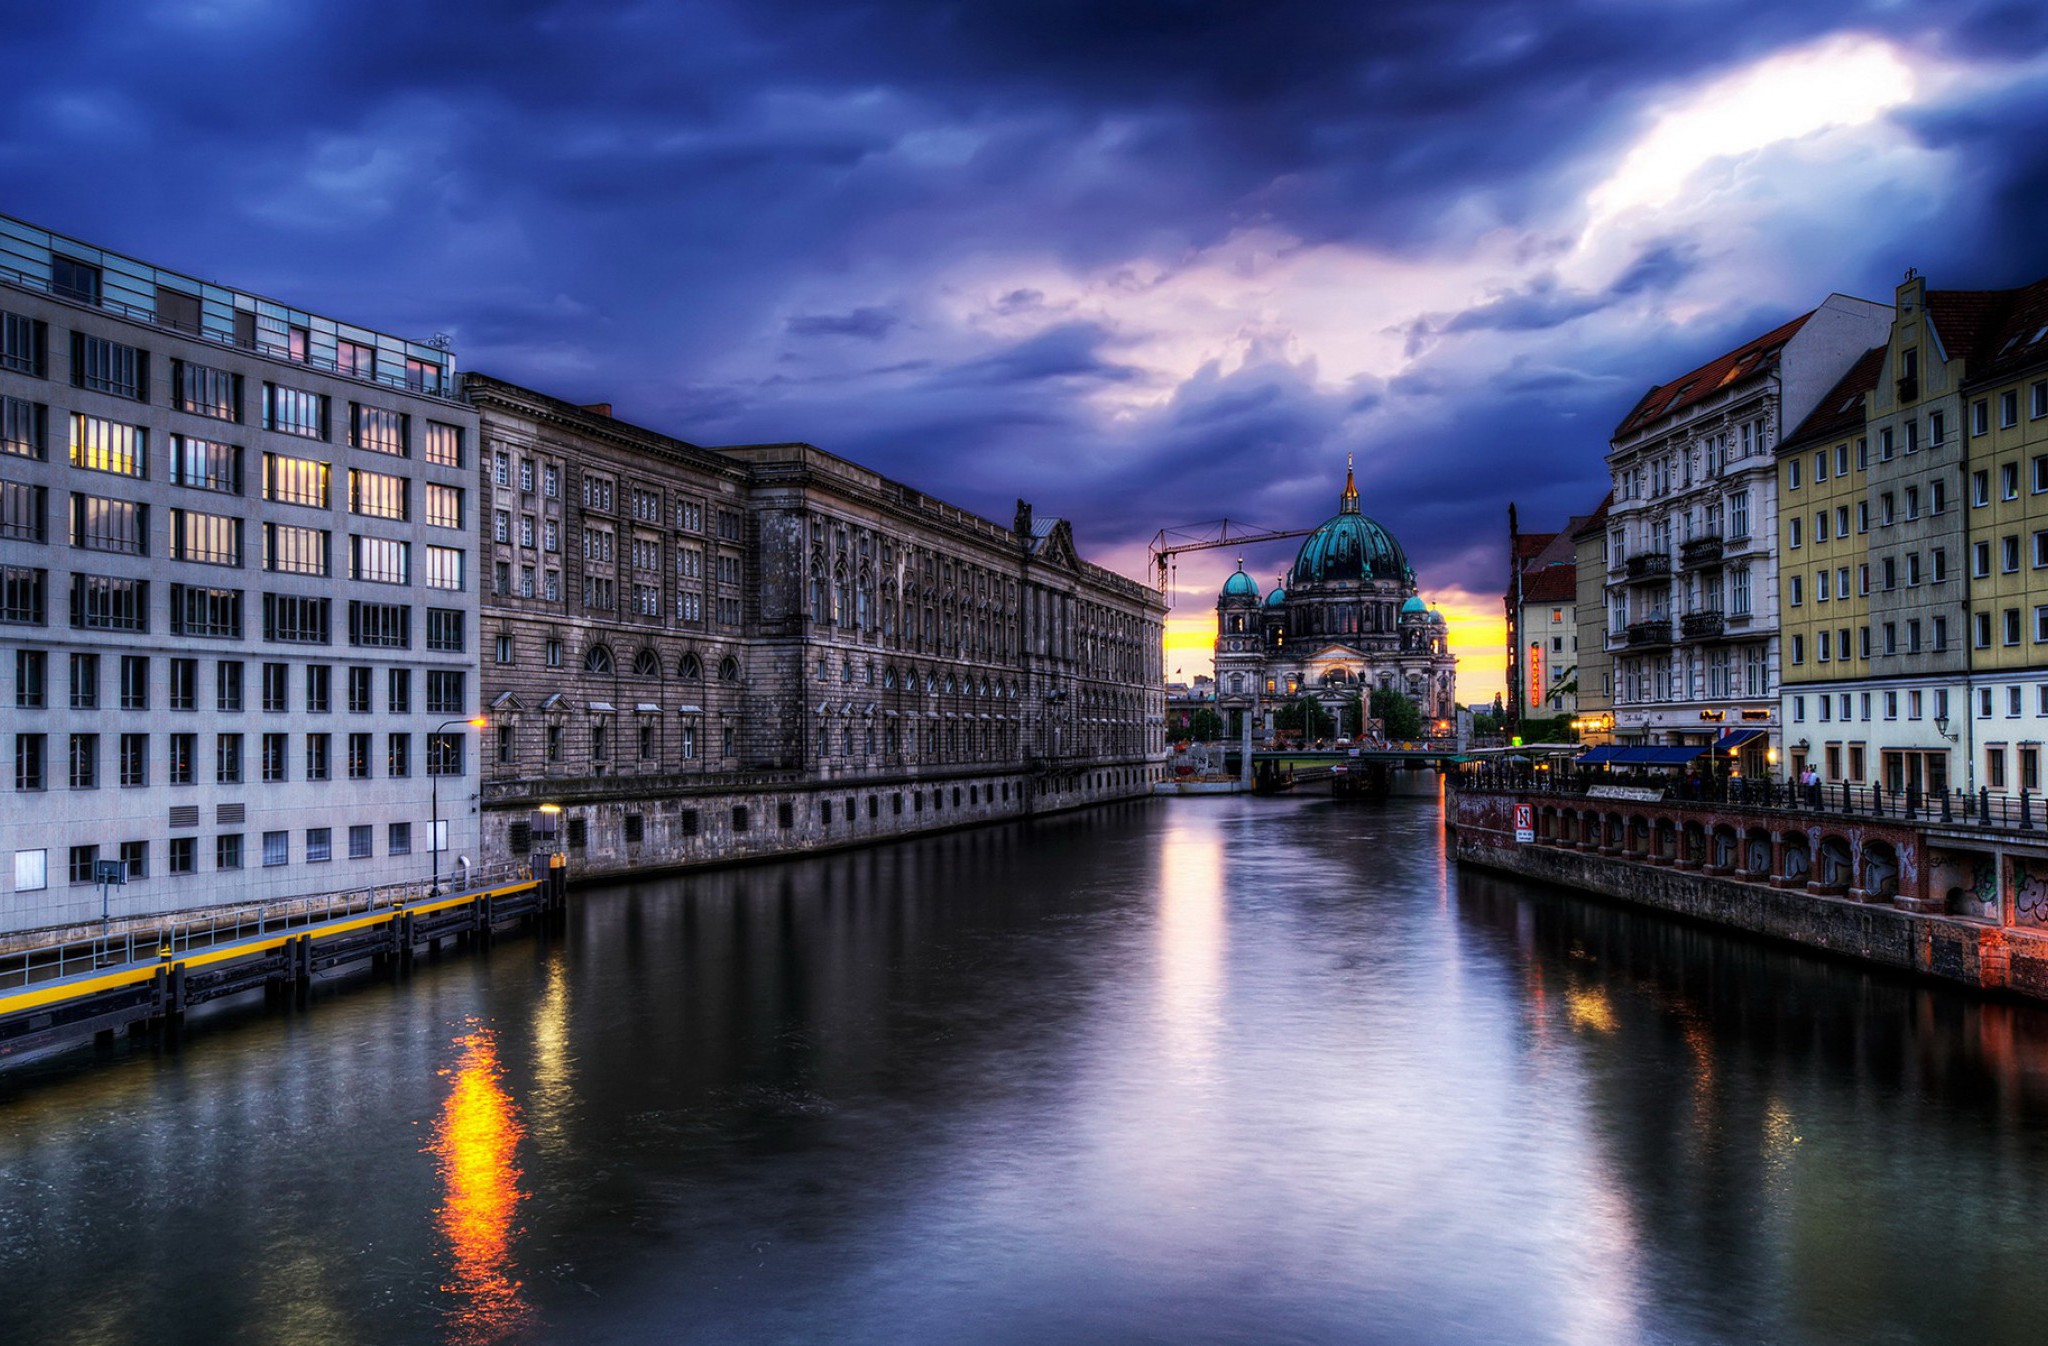 berlin, cities, man made, berlin cathedral, building, dusk, river